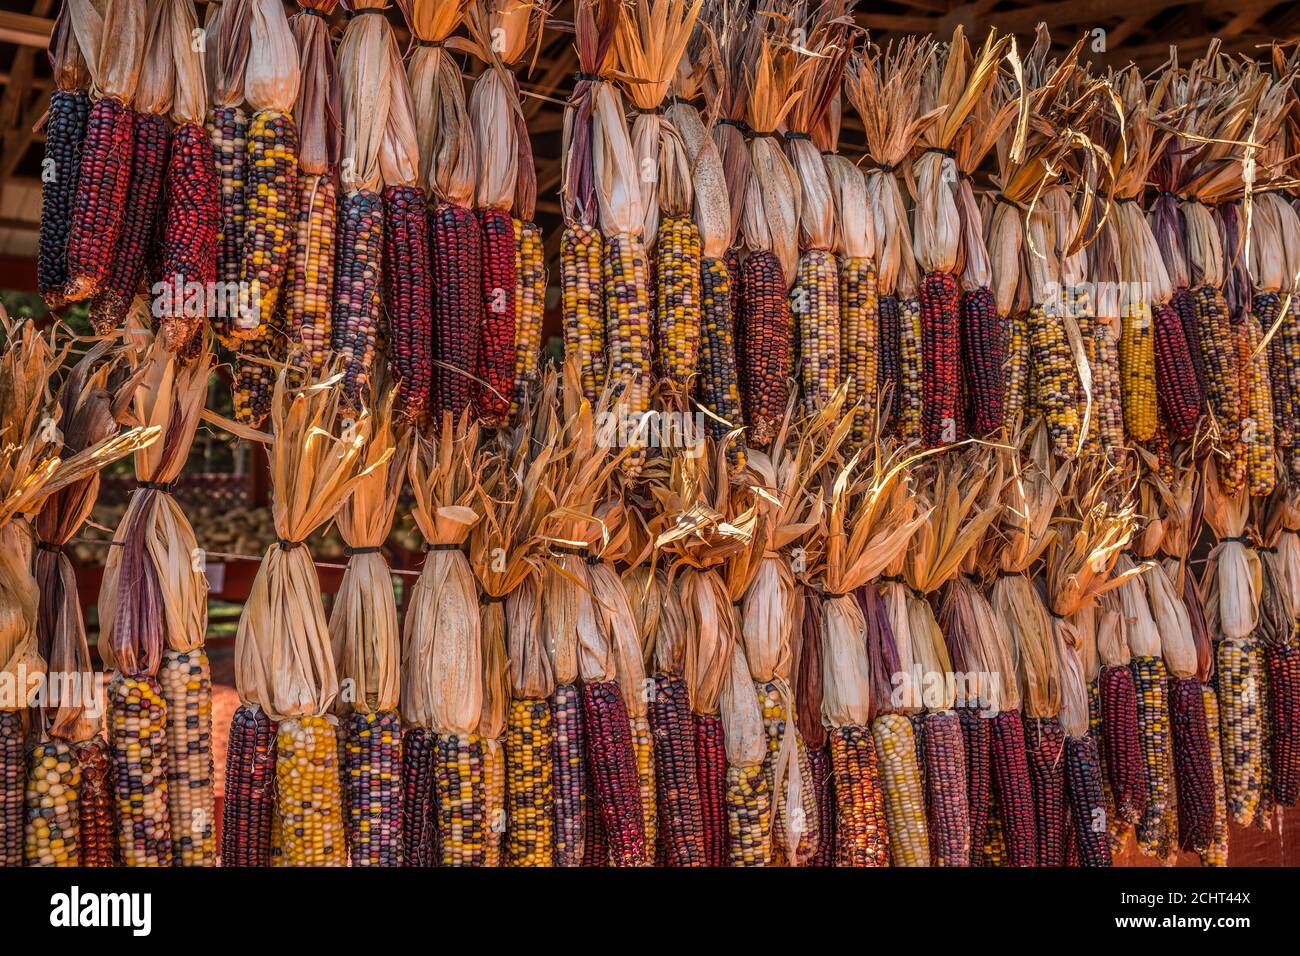 Colorful and decorative indian corn with husks hanging on display at a farm for sale with different varieties of multicolored corn for the autumn holi Stock Photo